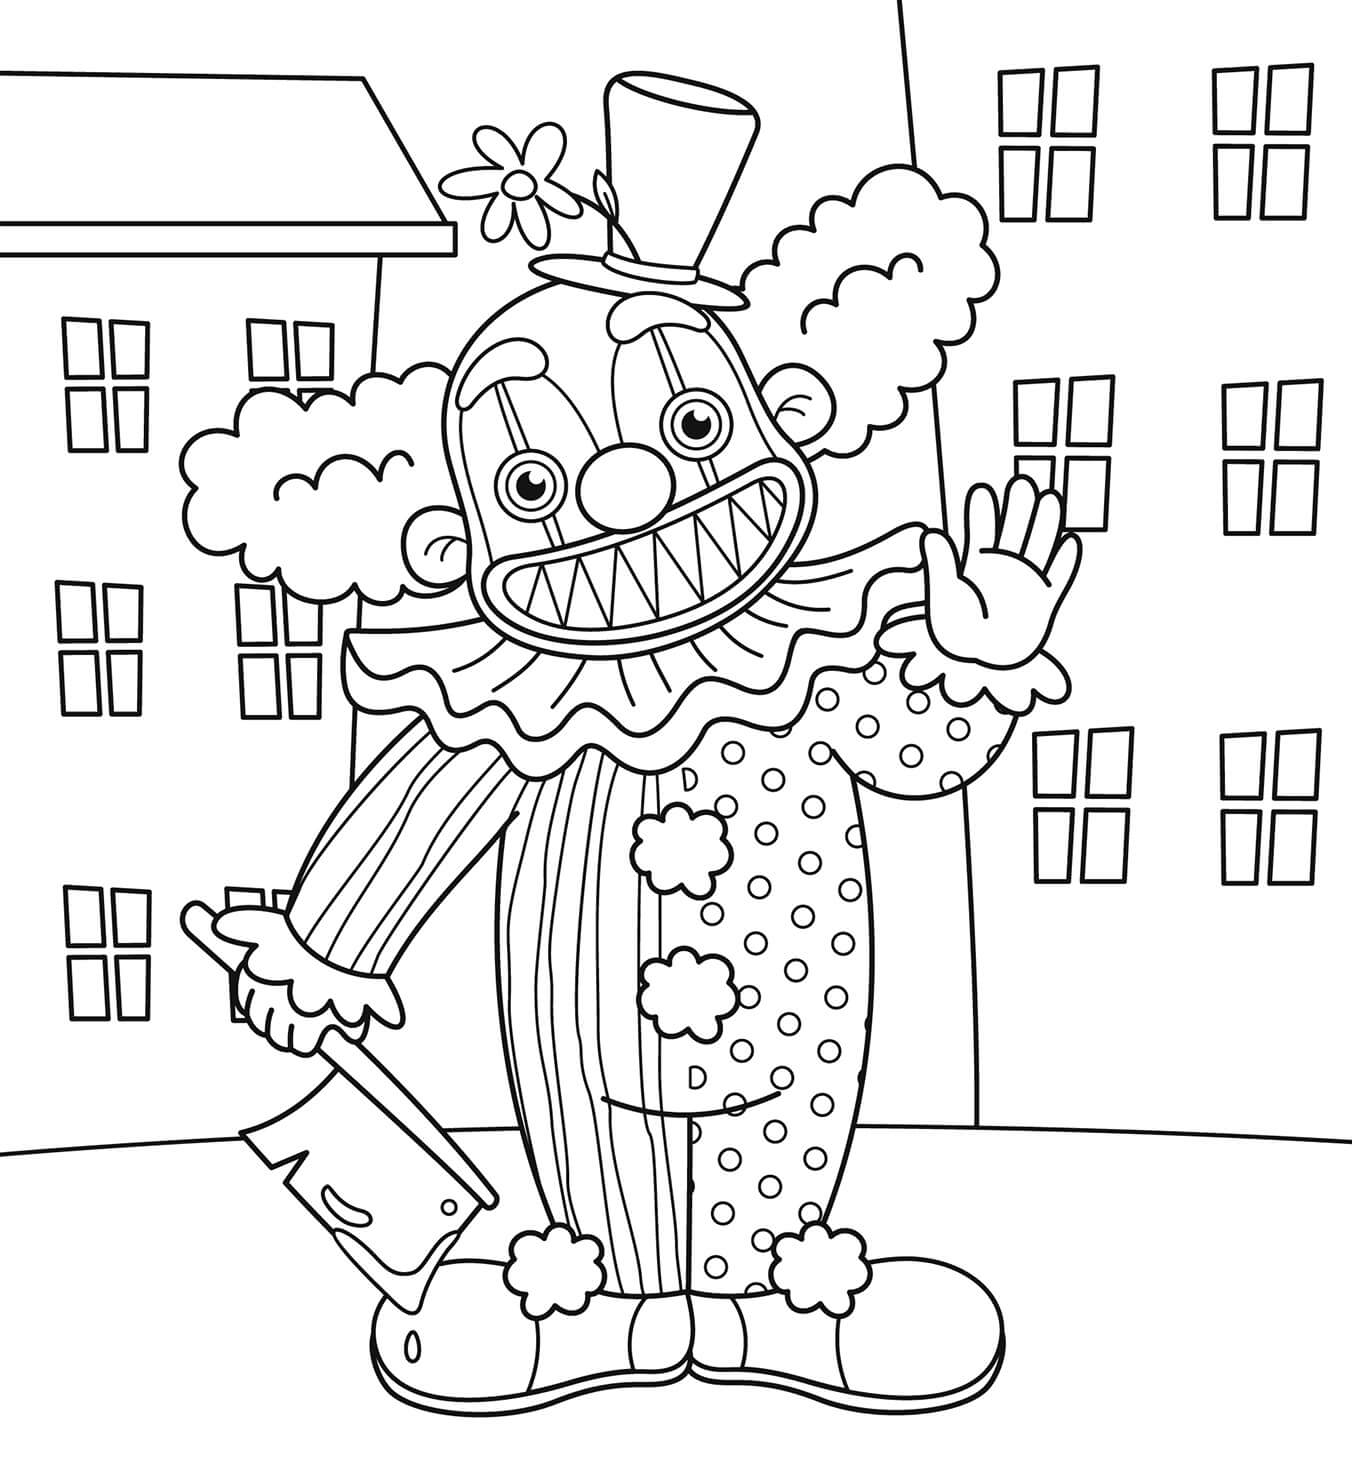 Evil clown holding knife coloring page